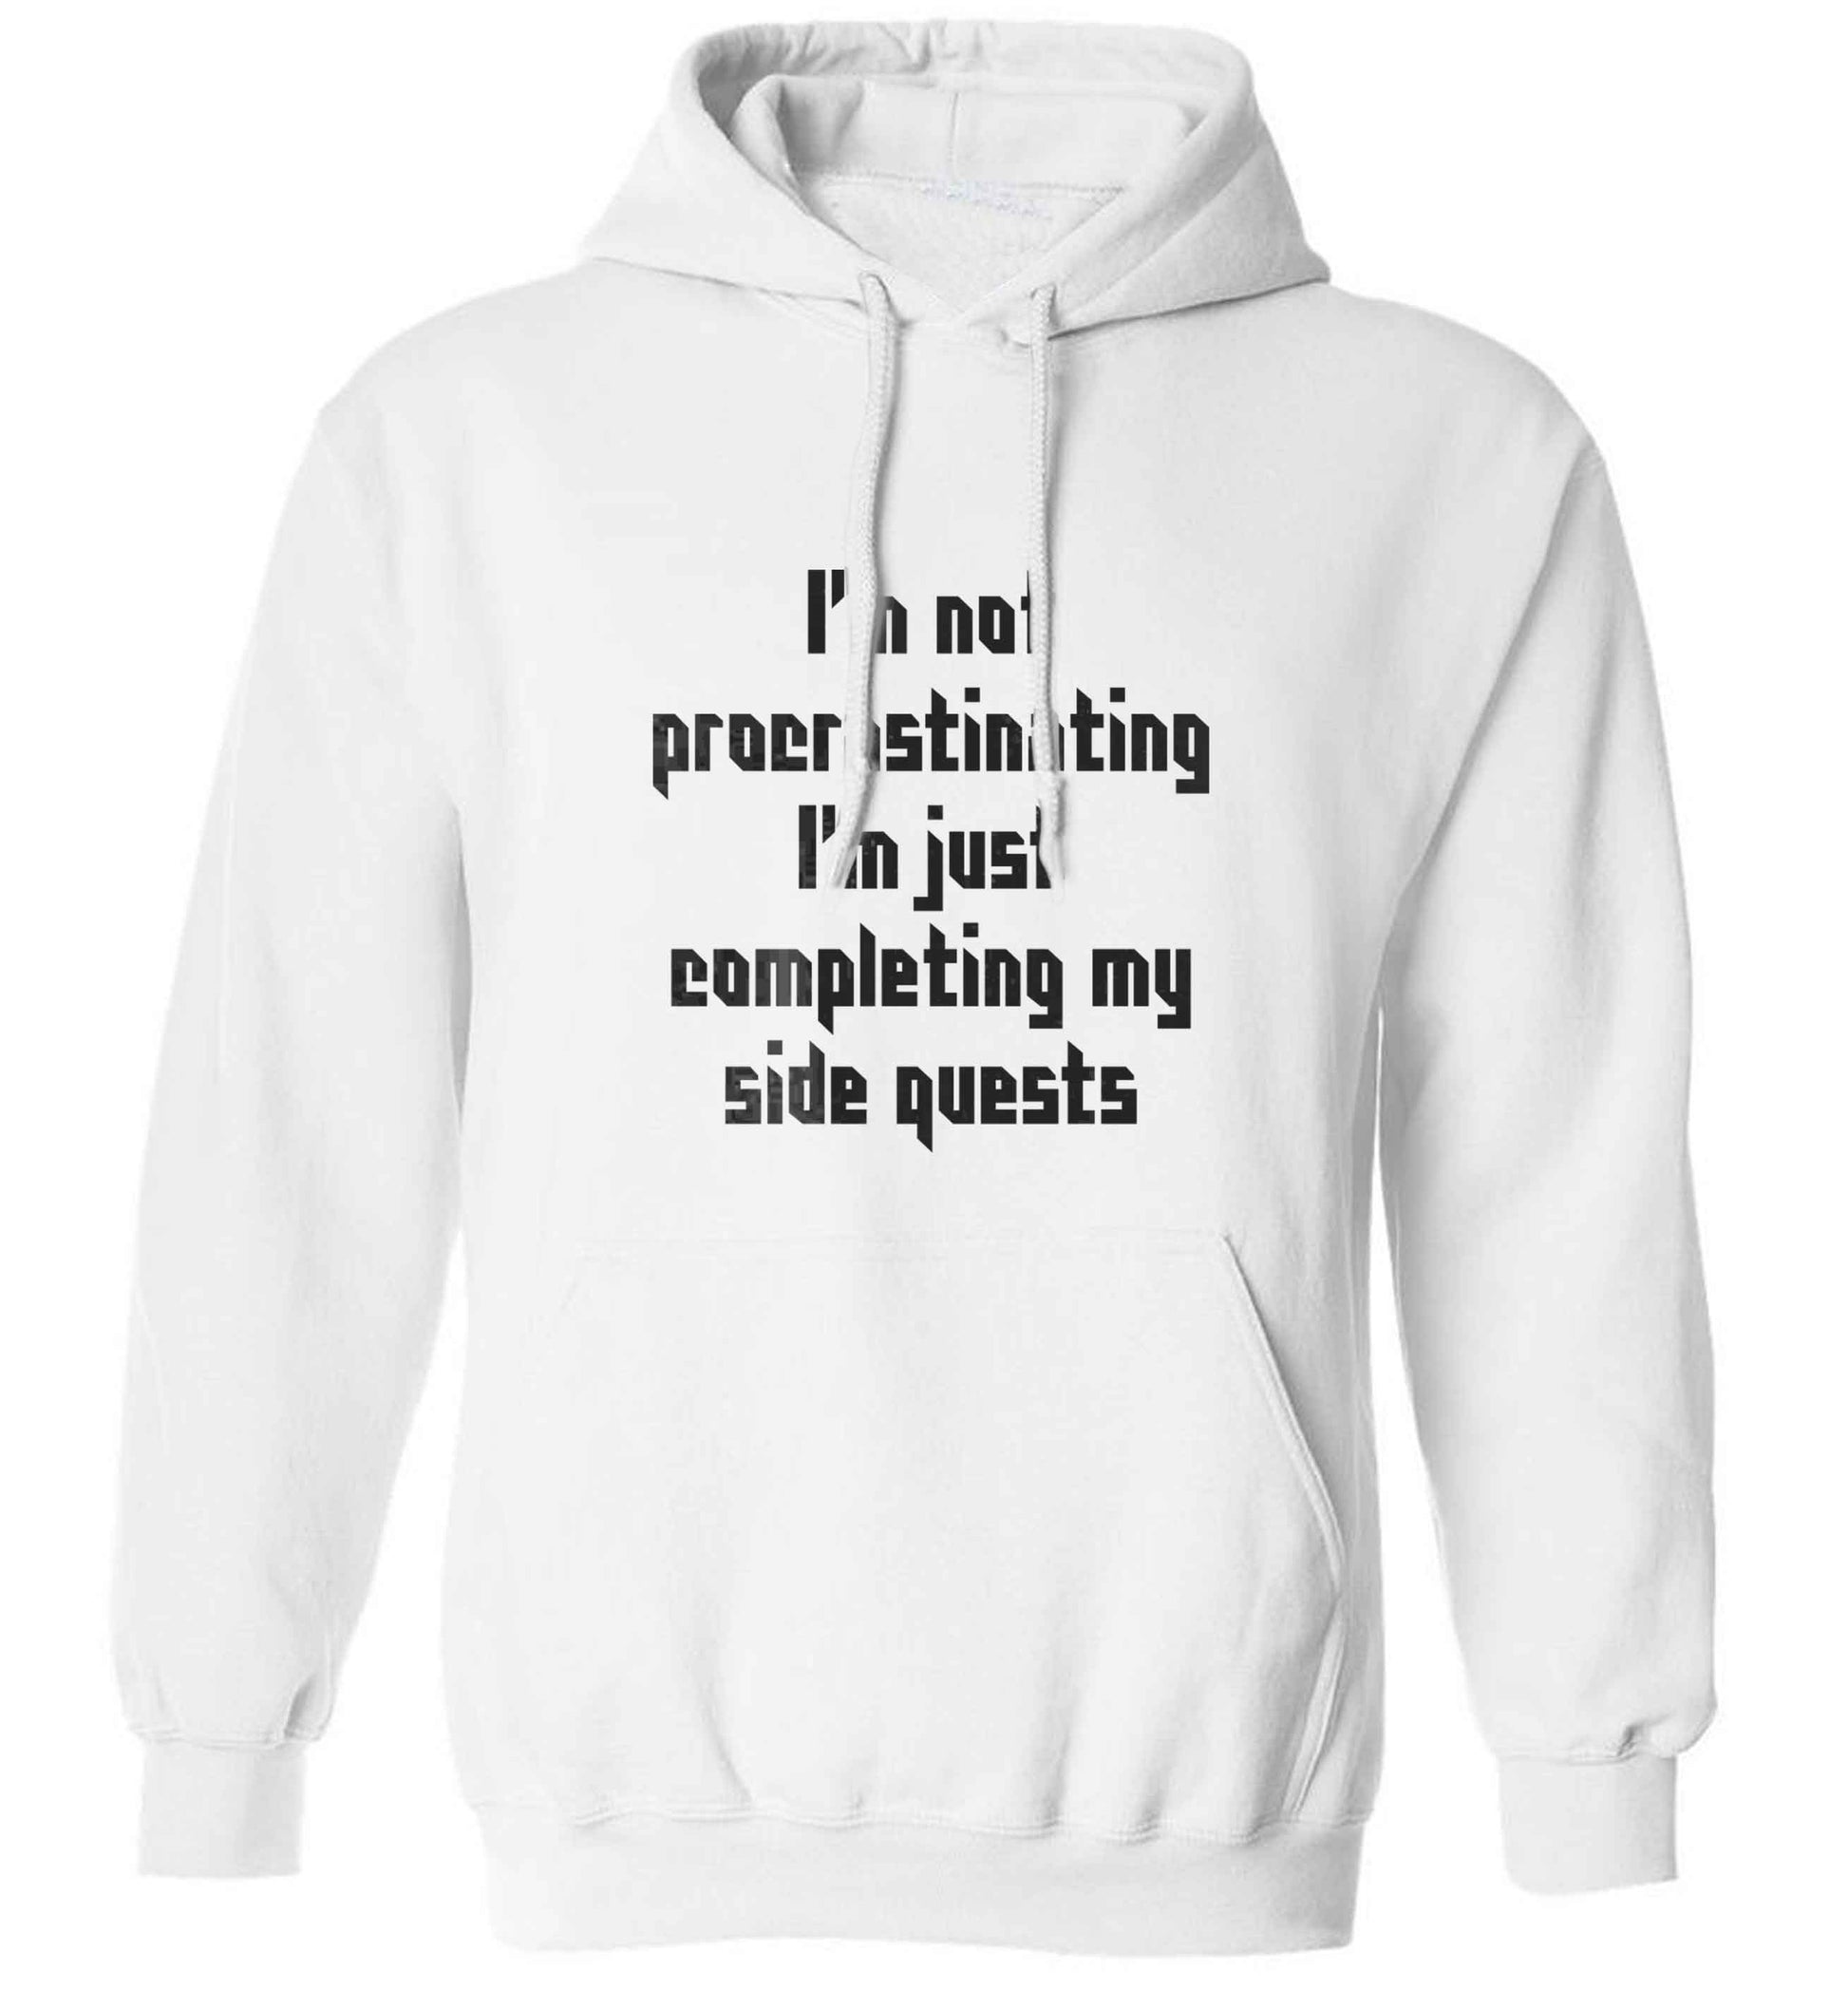 I'm not procrastinating I'm just completing my side quests adults unisex white hoodie 2XL